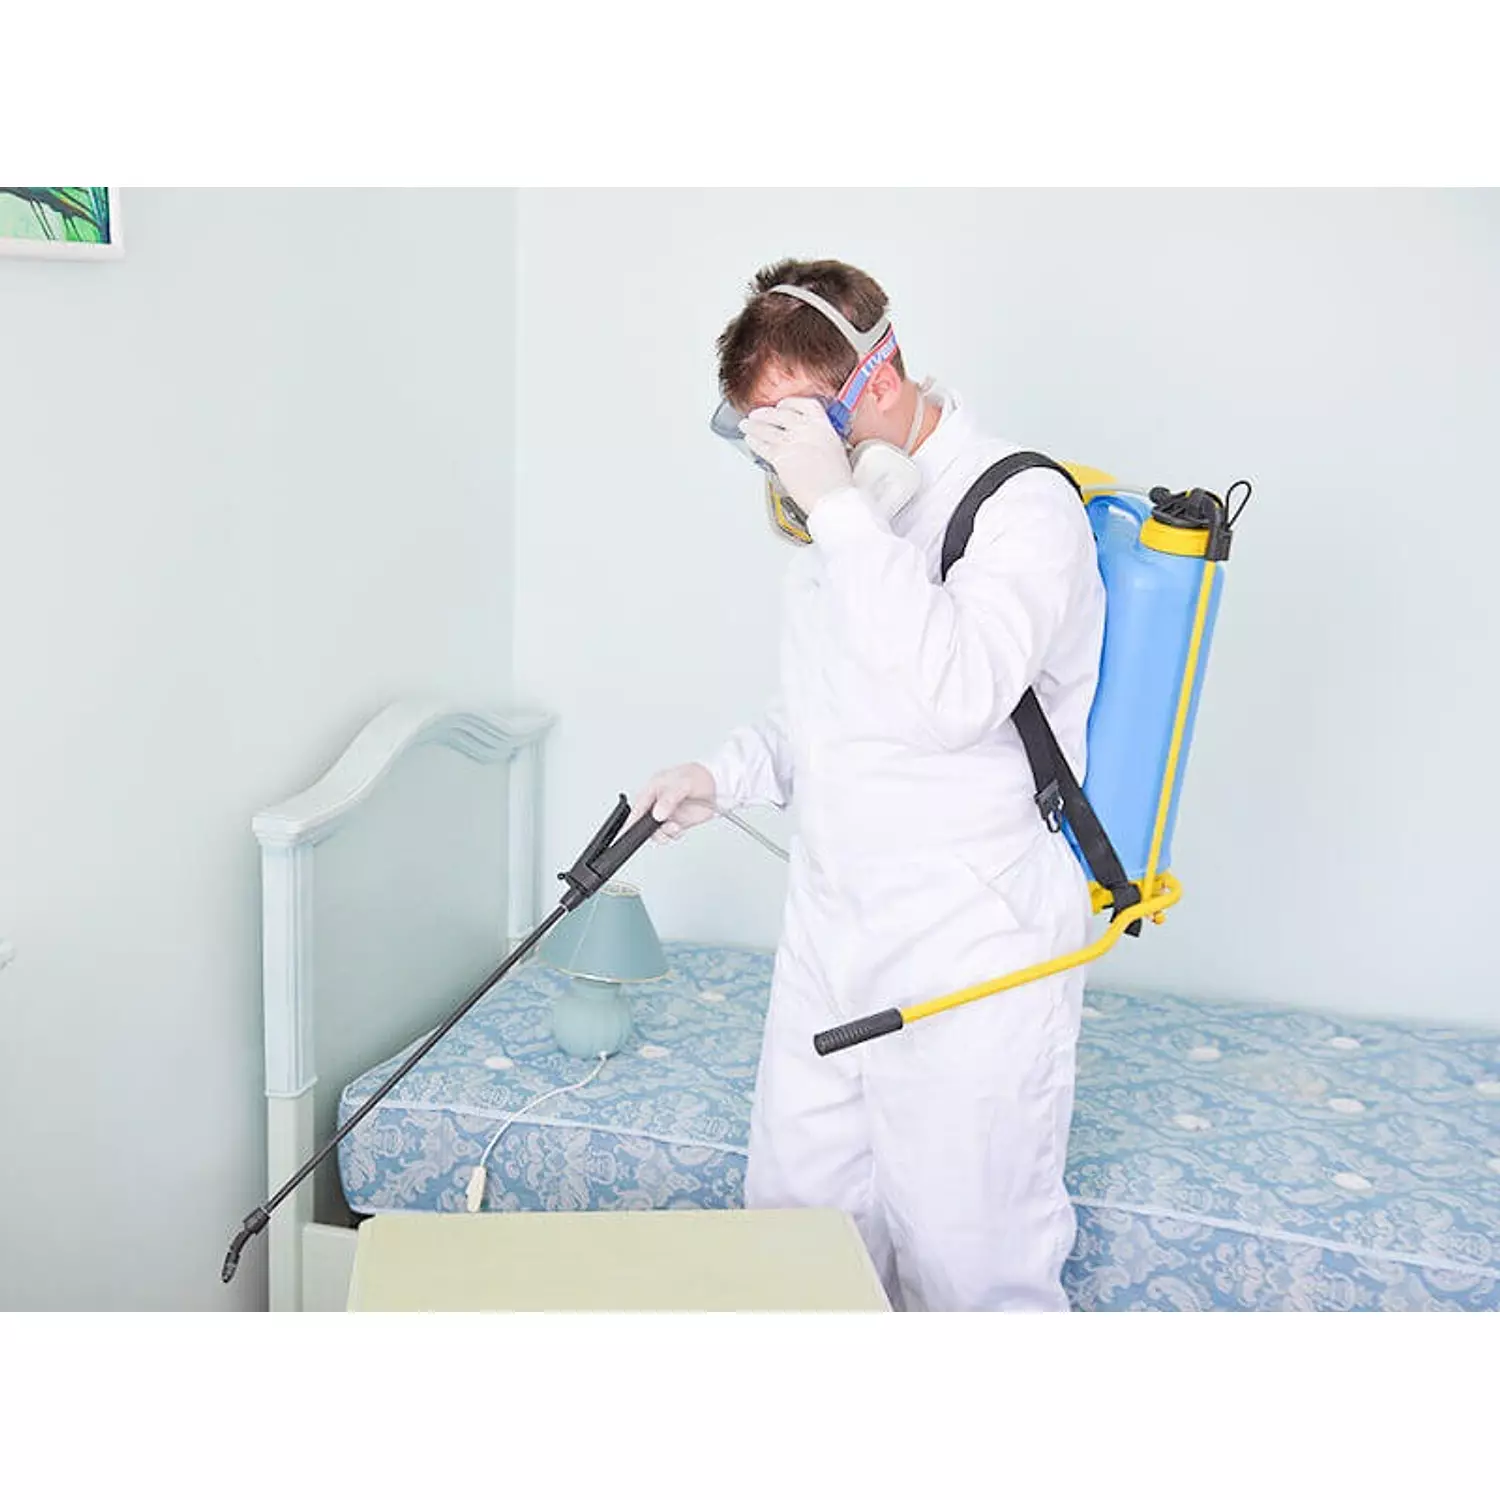 Room spray - bed bugs hover image